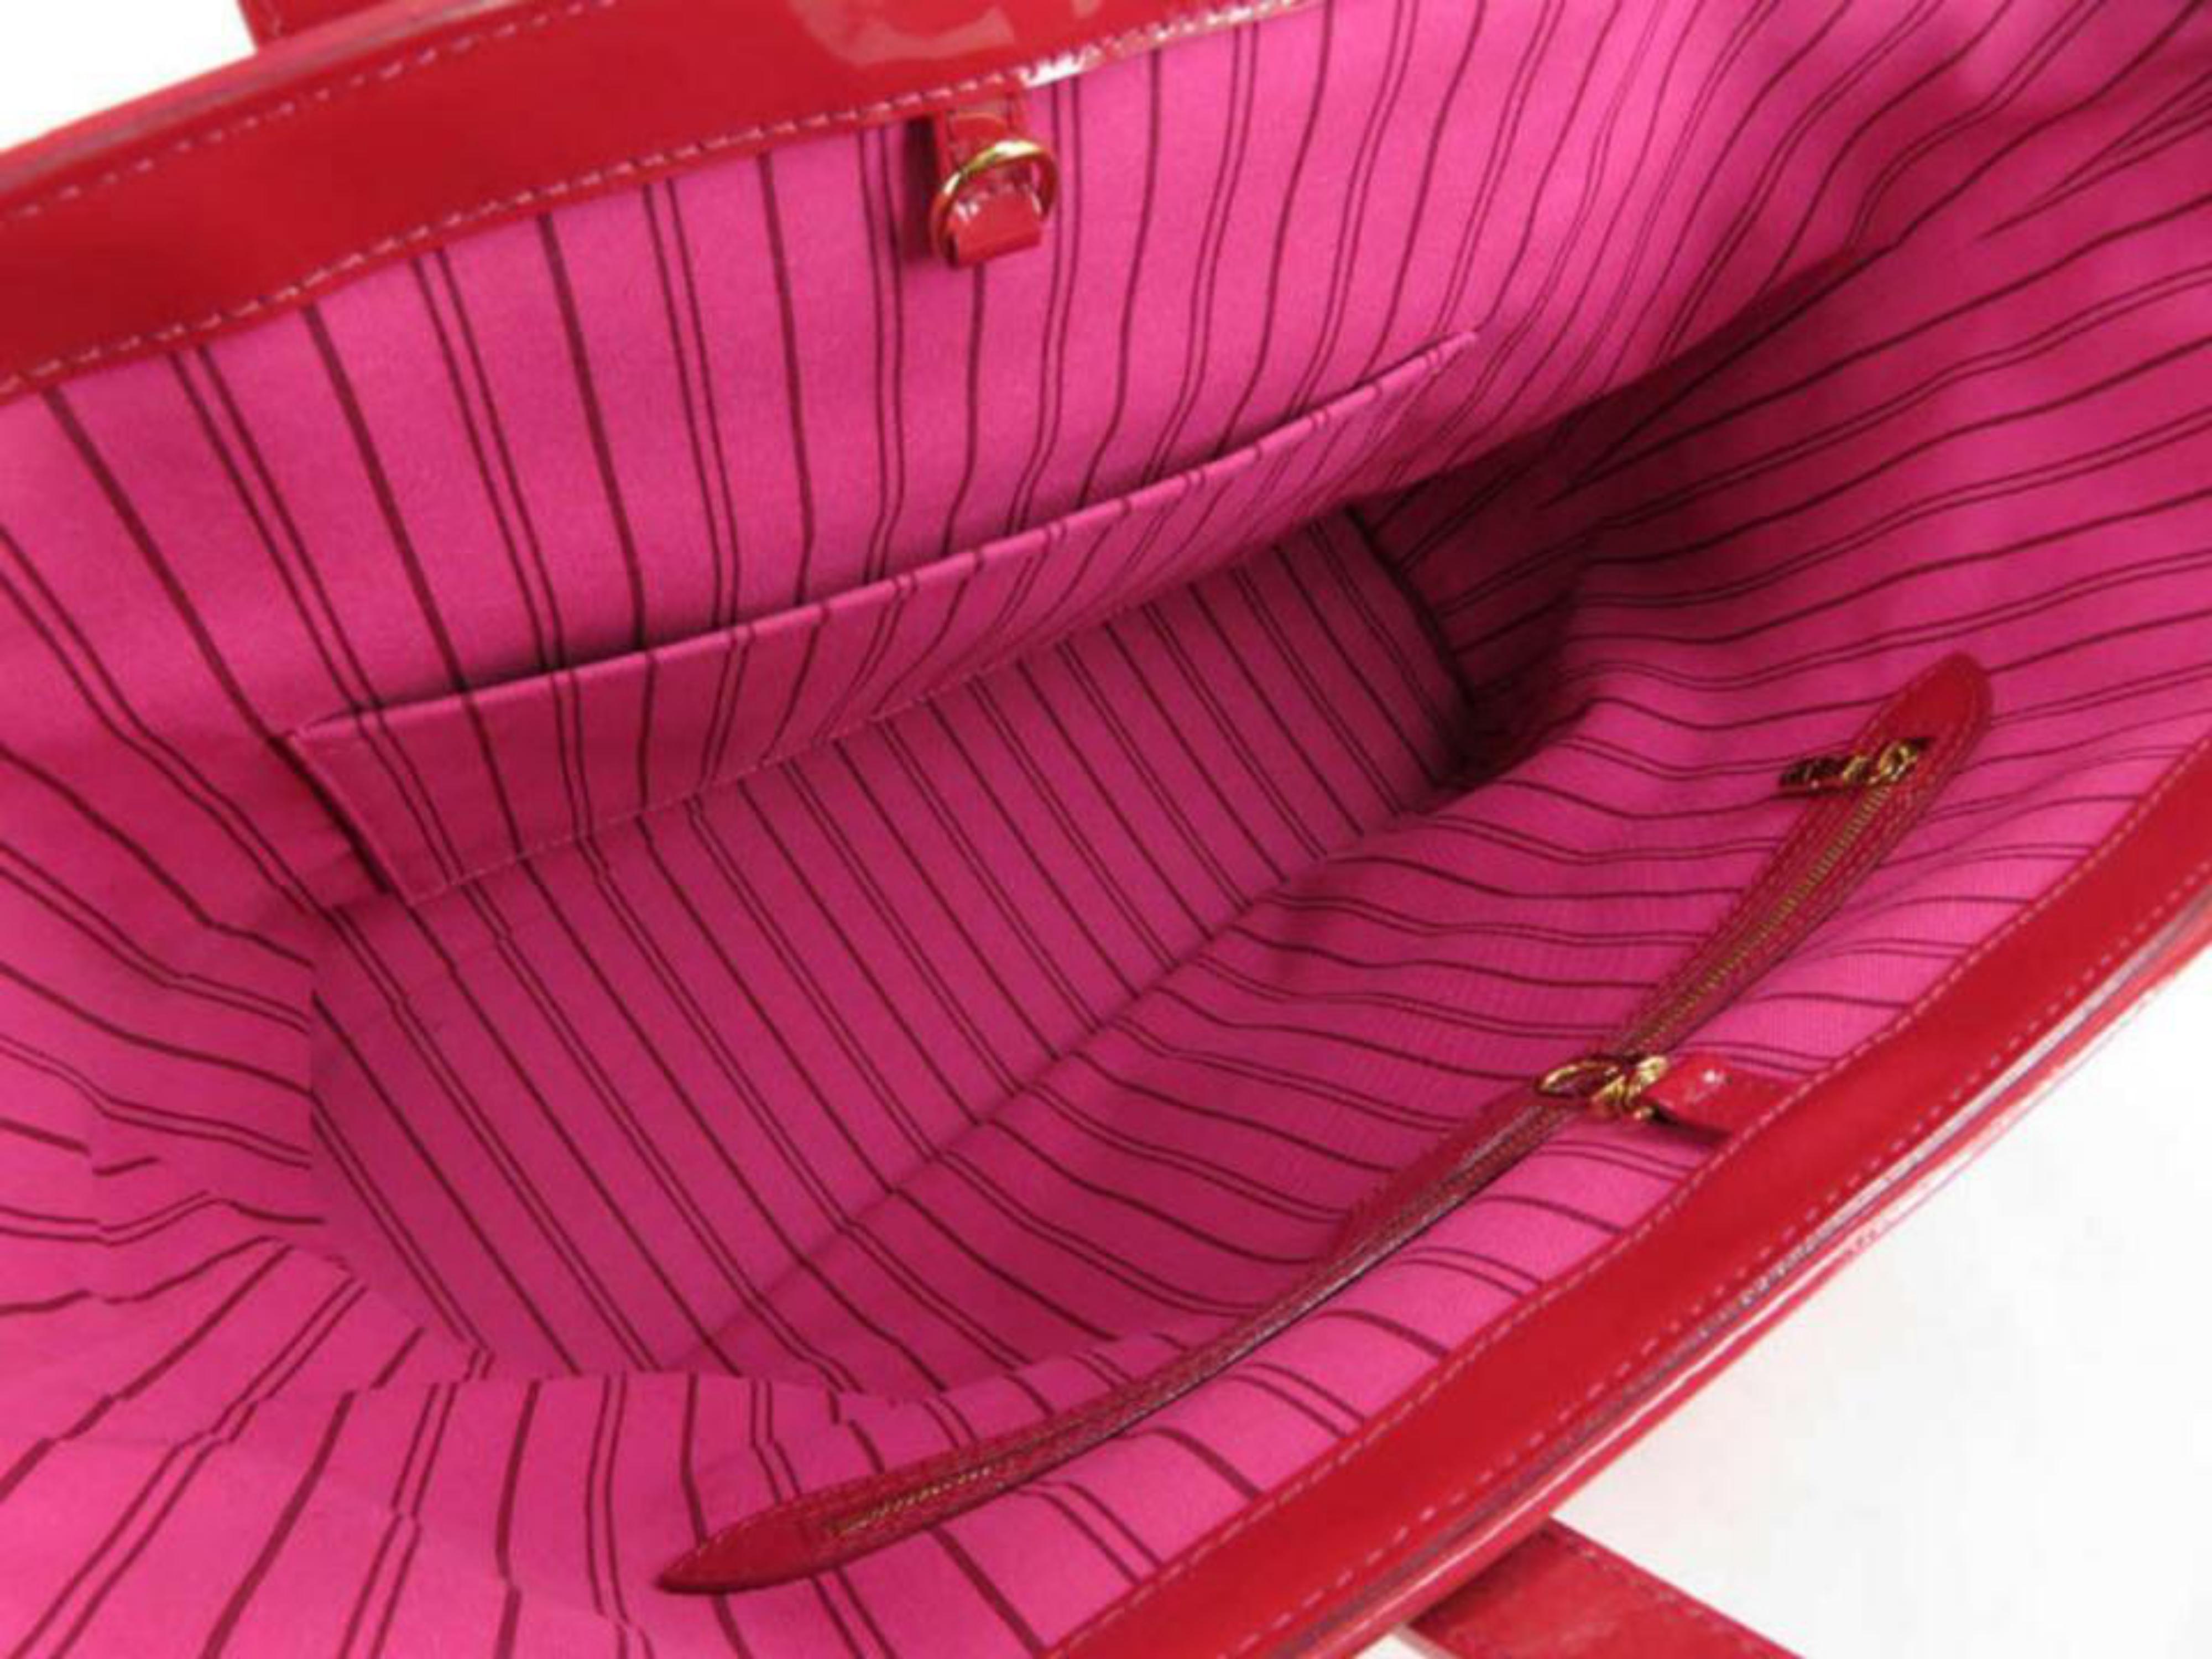 Louis Vuitton Murakami Cosmic Blossom Pm 870012 Pink Leather Tote In Excellent Condition For Sale In Forest Hills, NY